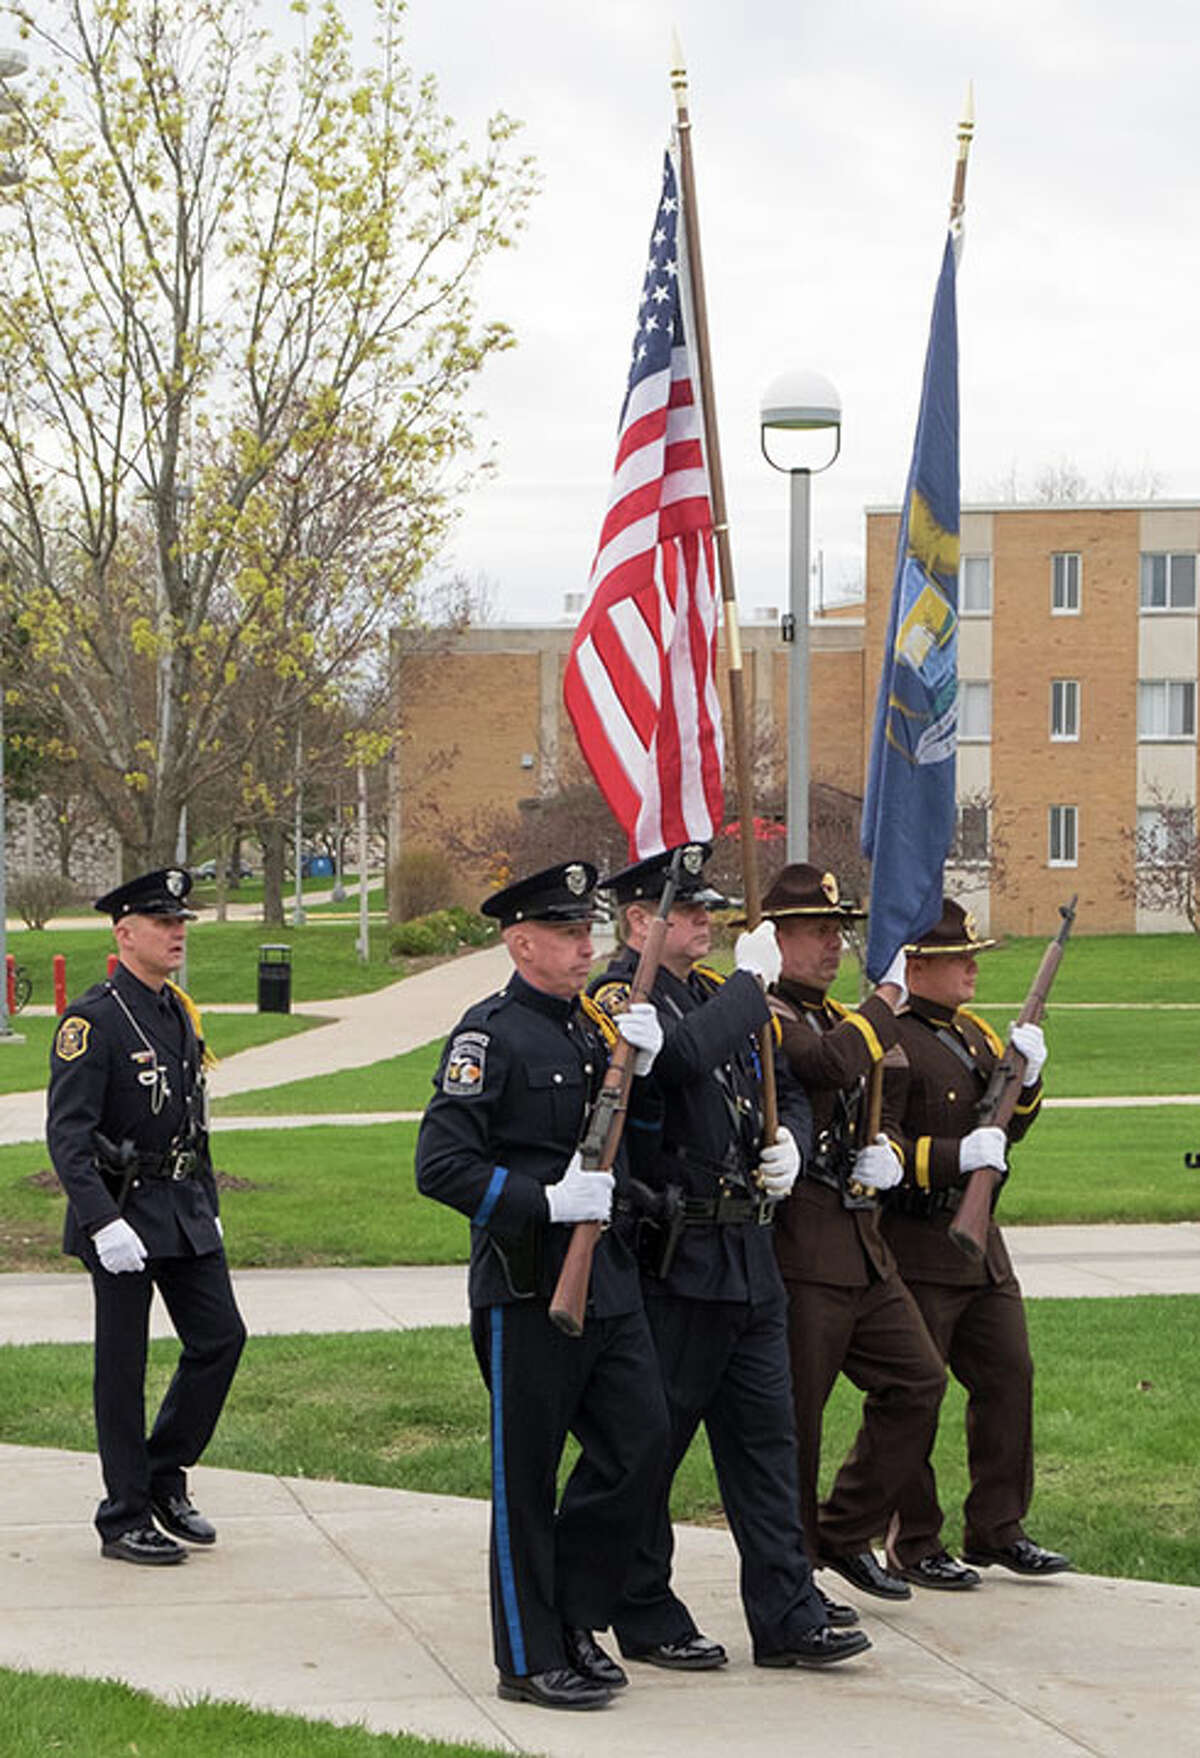 The 17th annual Police Memorial on Tuesday, May 10, beginning at 9 a.m.  will be the first Police Memorial since 2019 and will be hosted by John Allen, the current Ferris Department of Public Safety director.